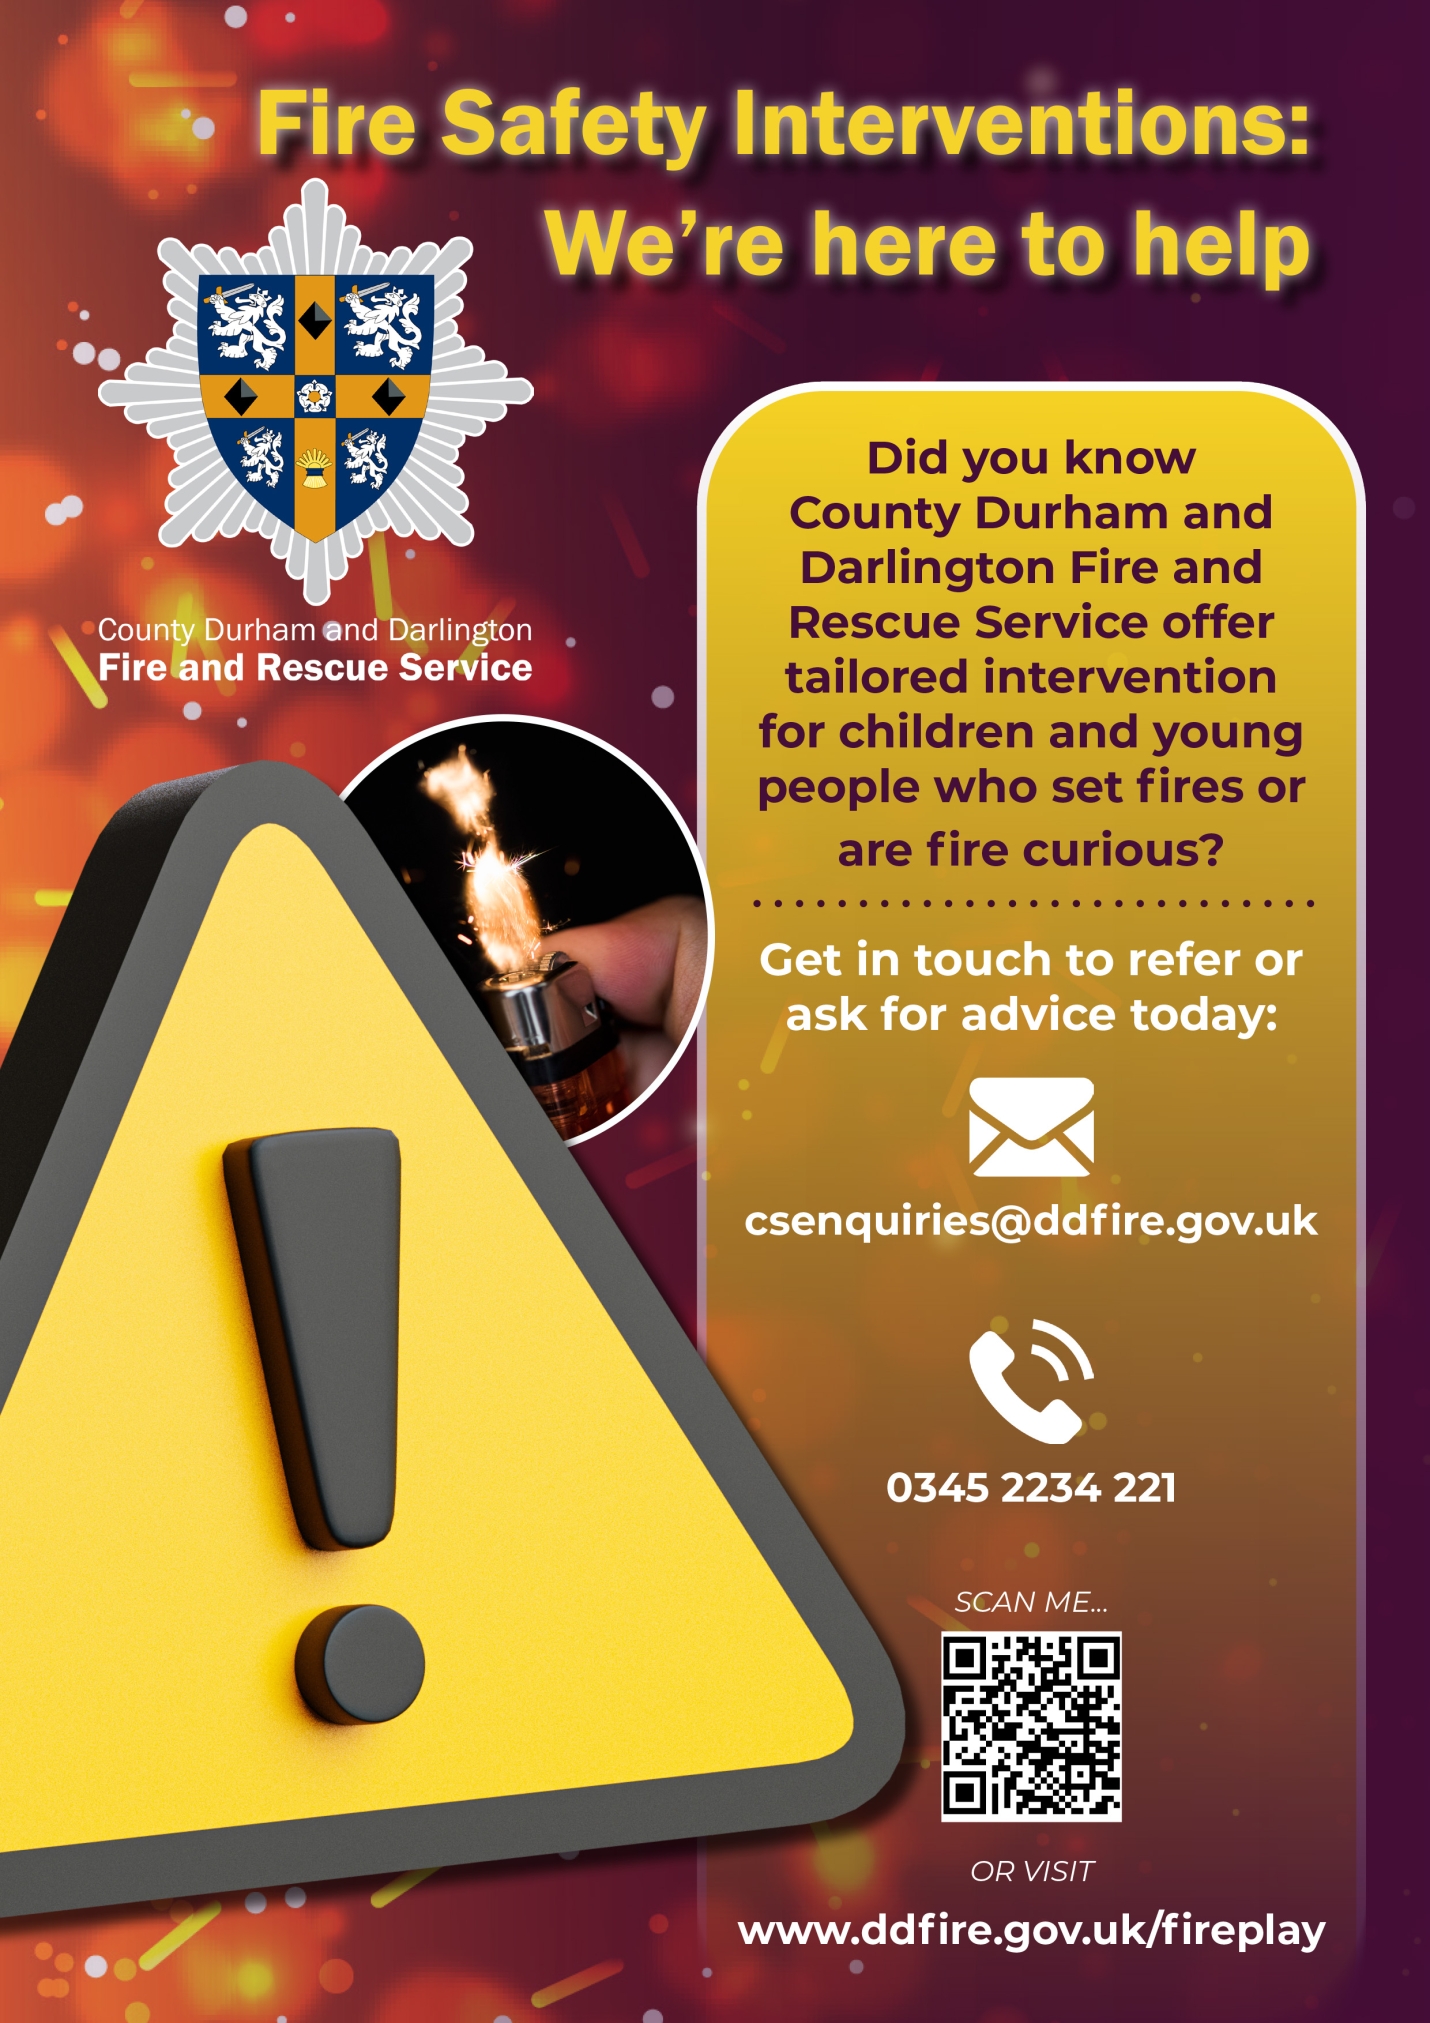 Poster with the following information: Fire Safety Interventions - we're here to help. Did you know County Durham and Darlington Fire and Rescue Service offer tailored intervention for children and young people who set fires or are fire curious? Get in touch to ask for advice: csenquiries@ddfire.gov.uk or call 0345 2234 221